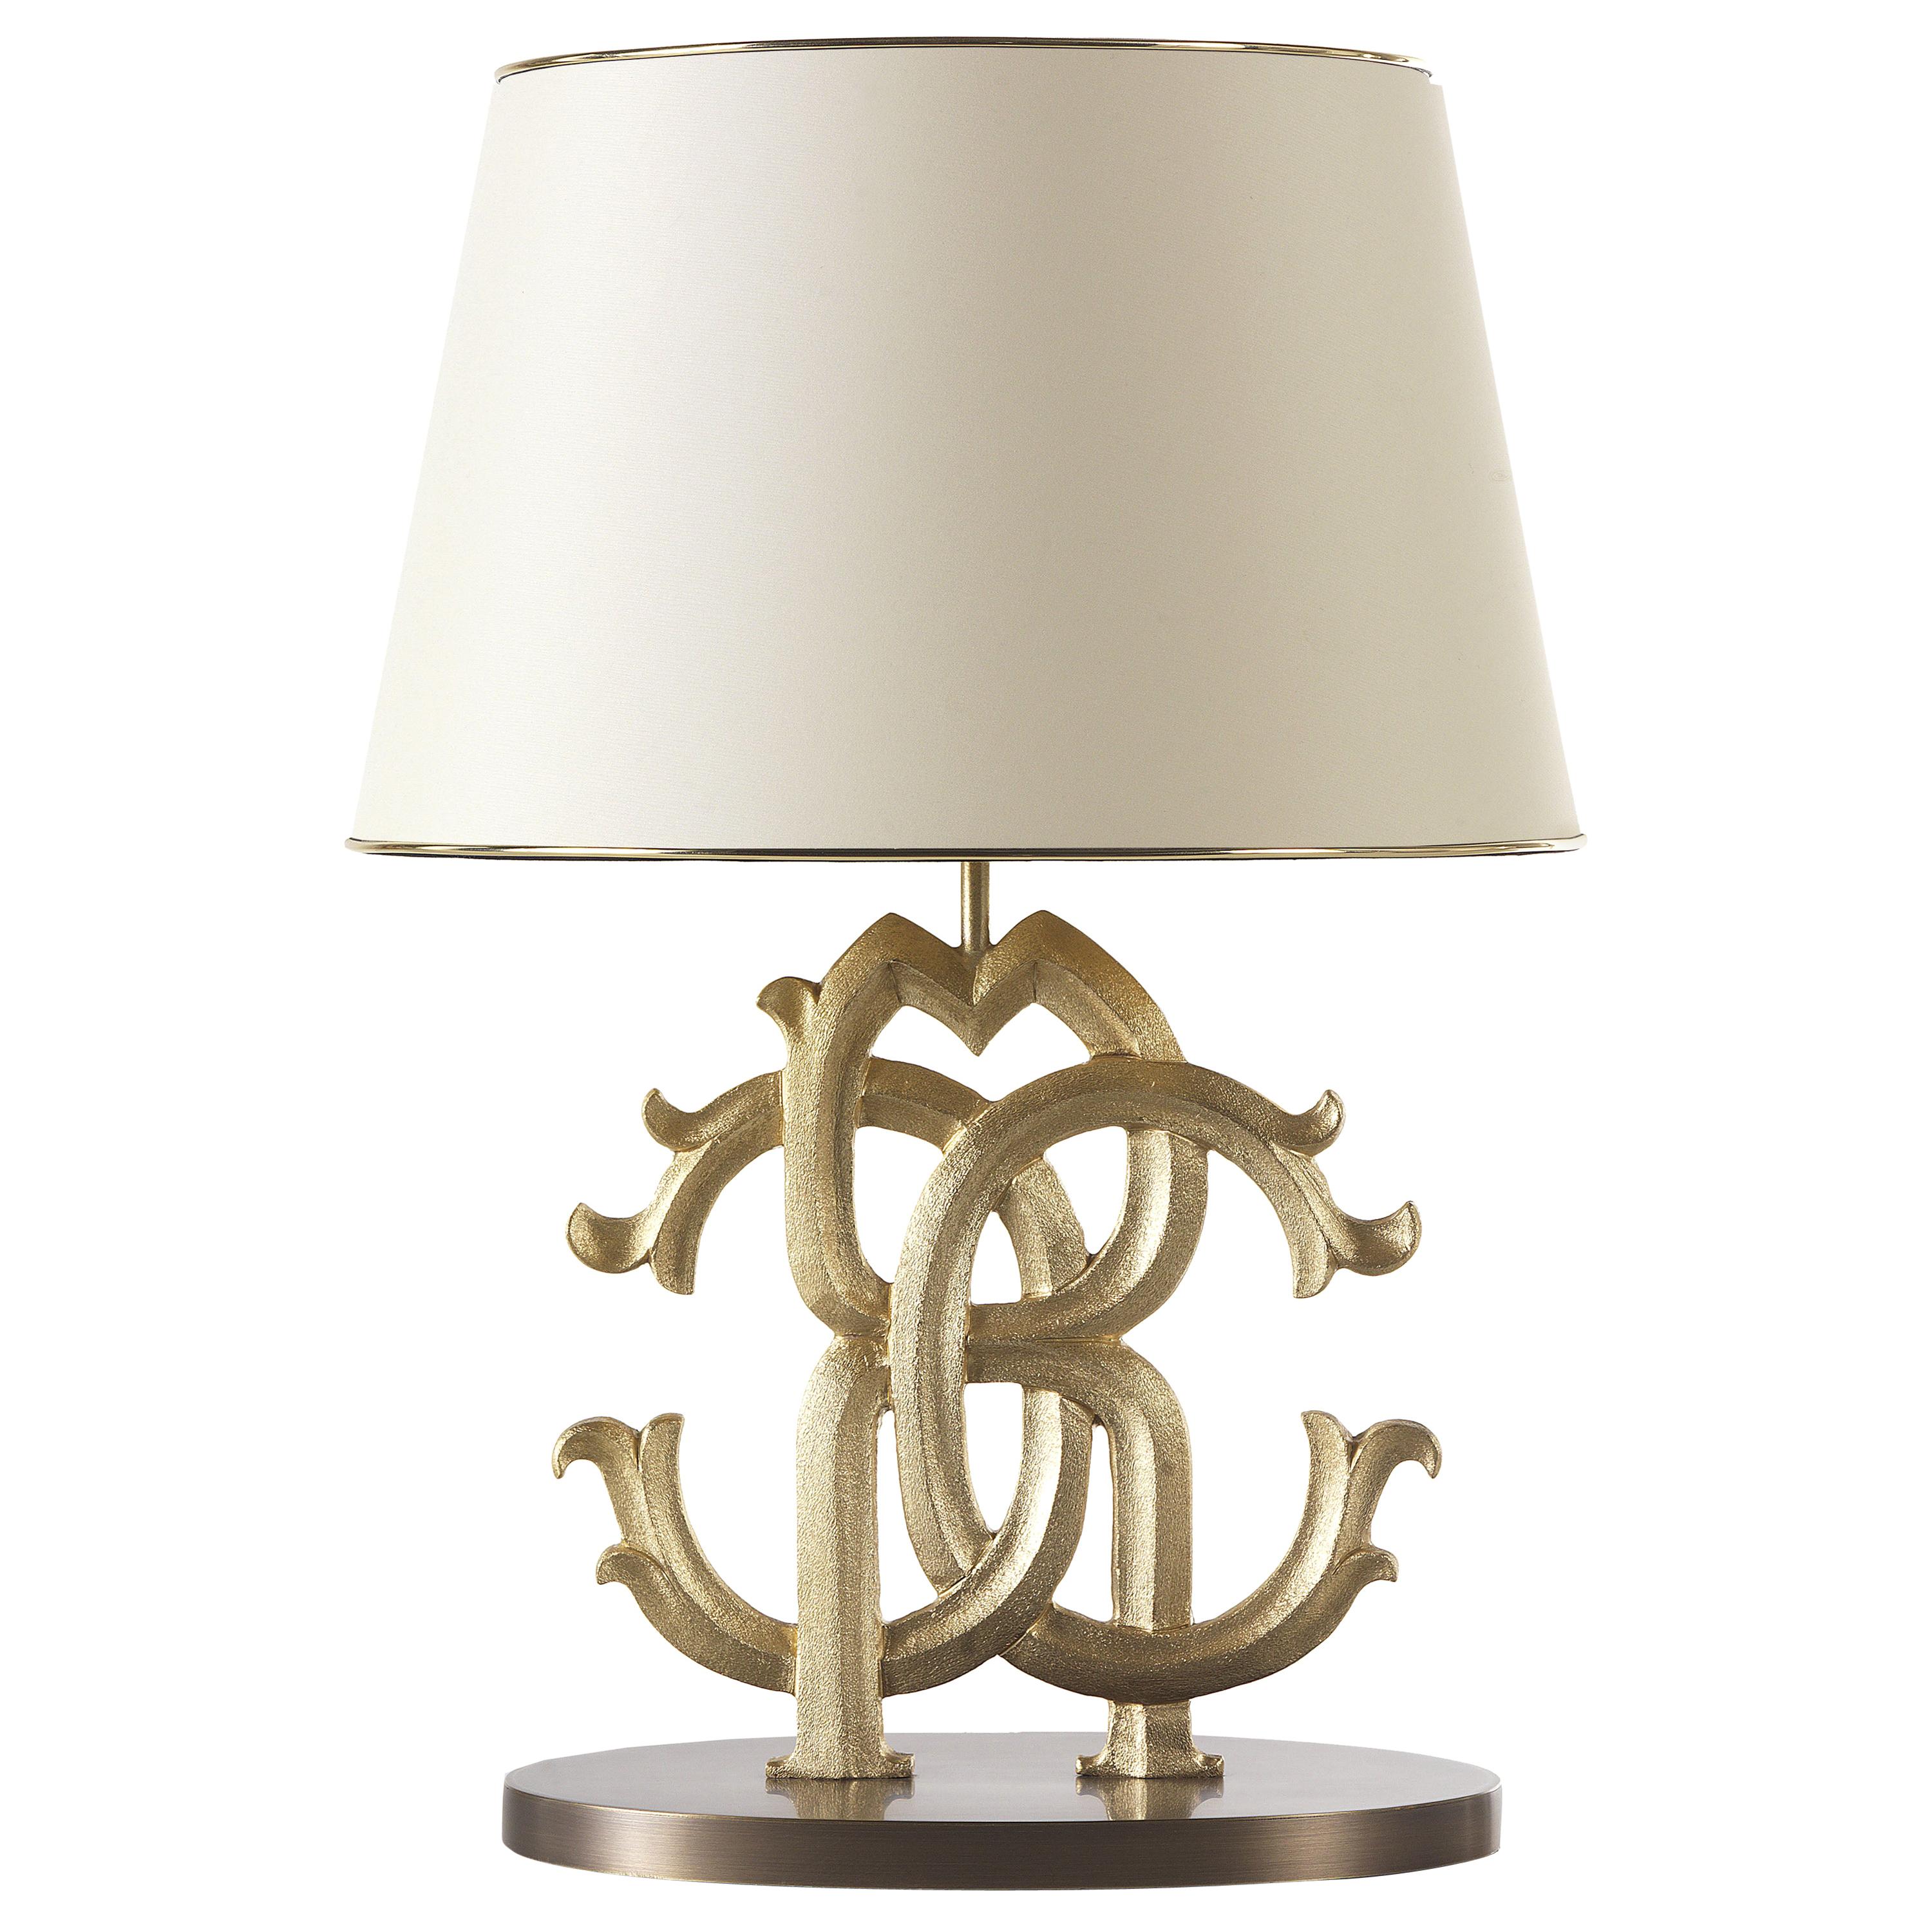 21st Century Logo Table Lamp with Ivory Shade by Roberto Cavalli Home Interiors For Sale